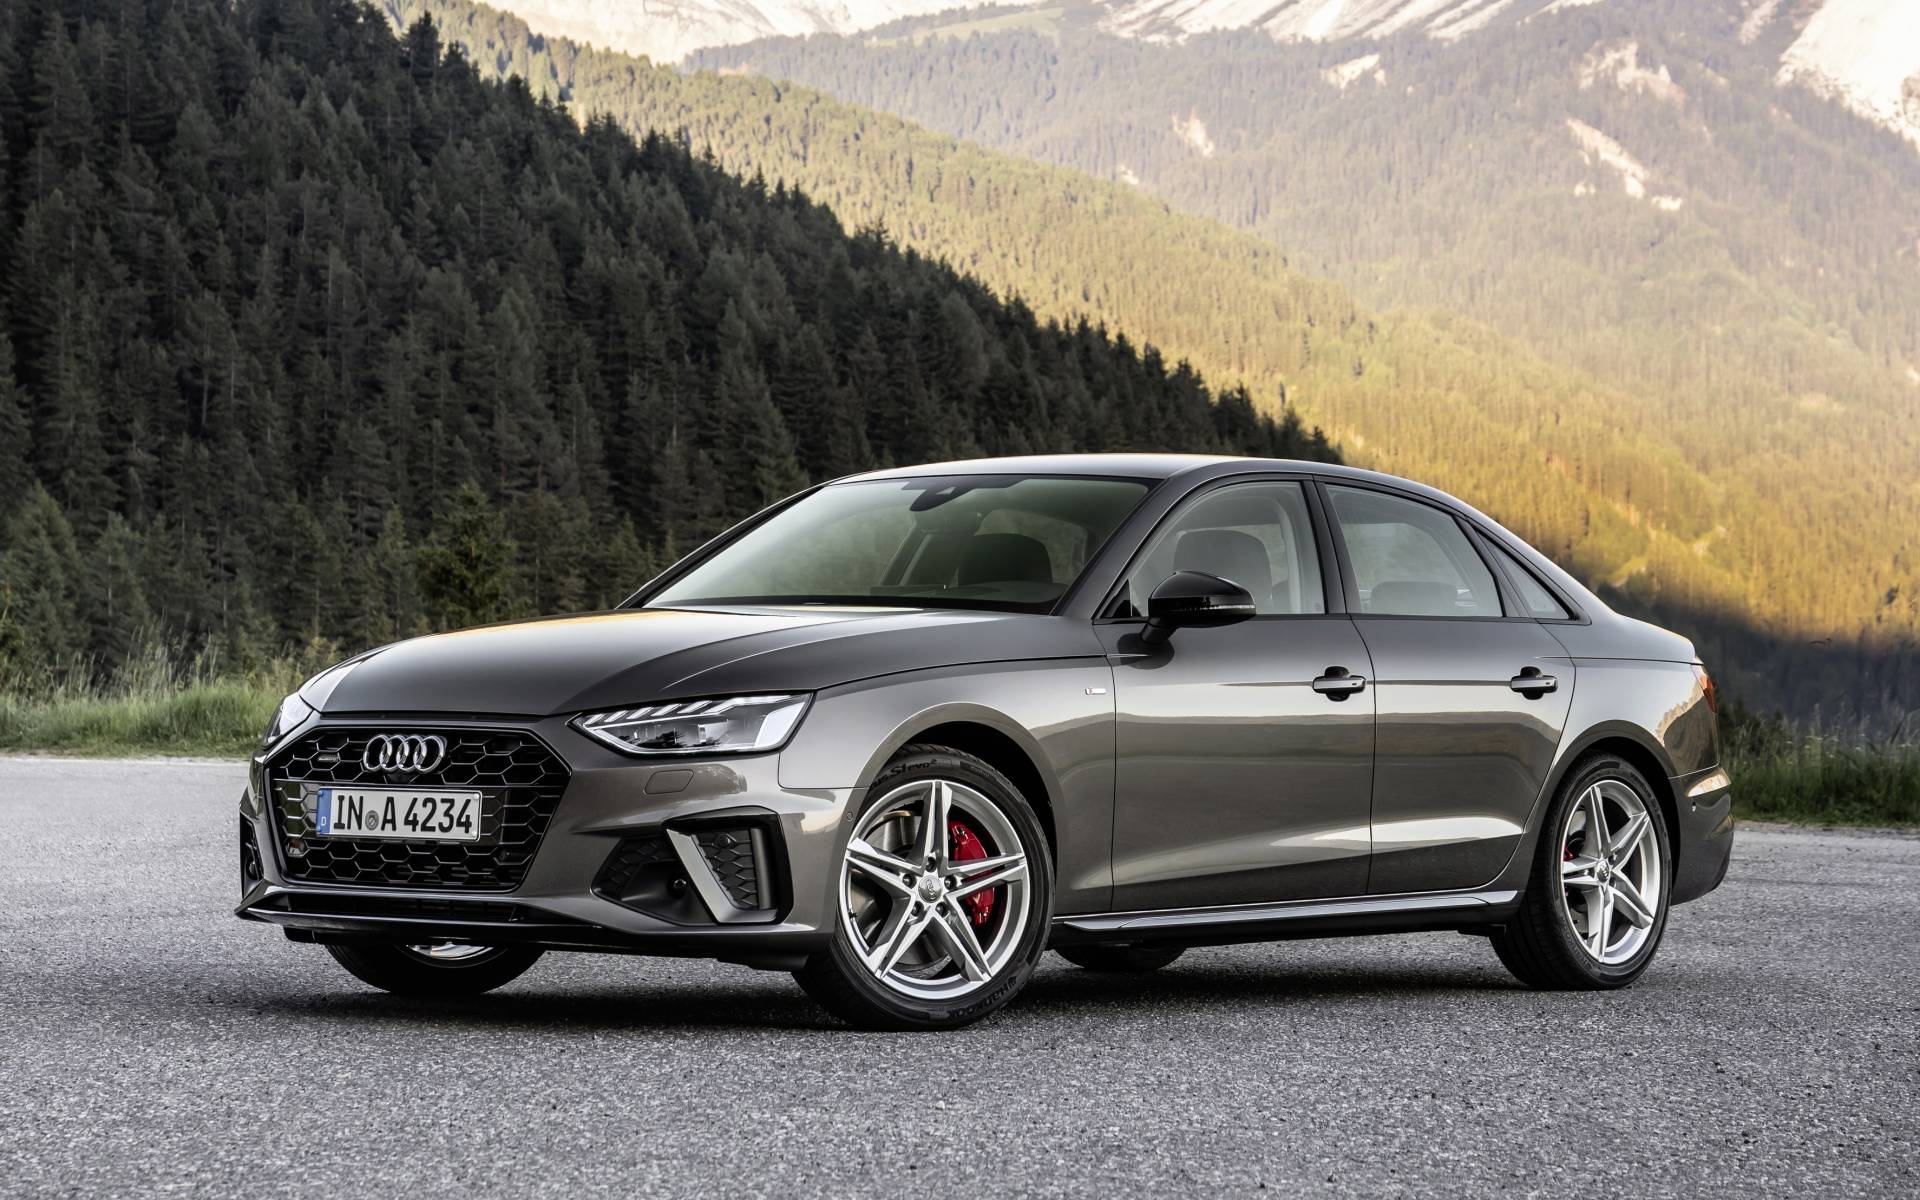 2020 Audi A4 Rating - The Car Guide